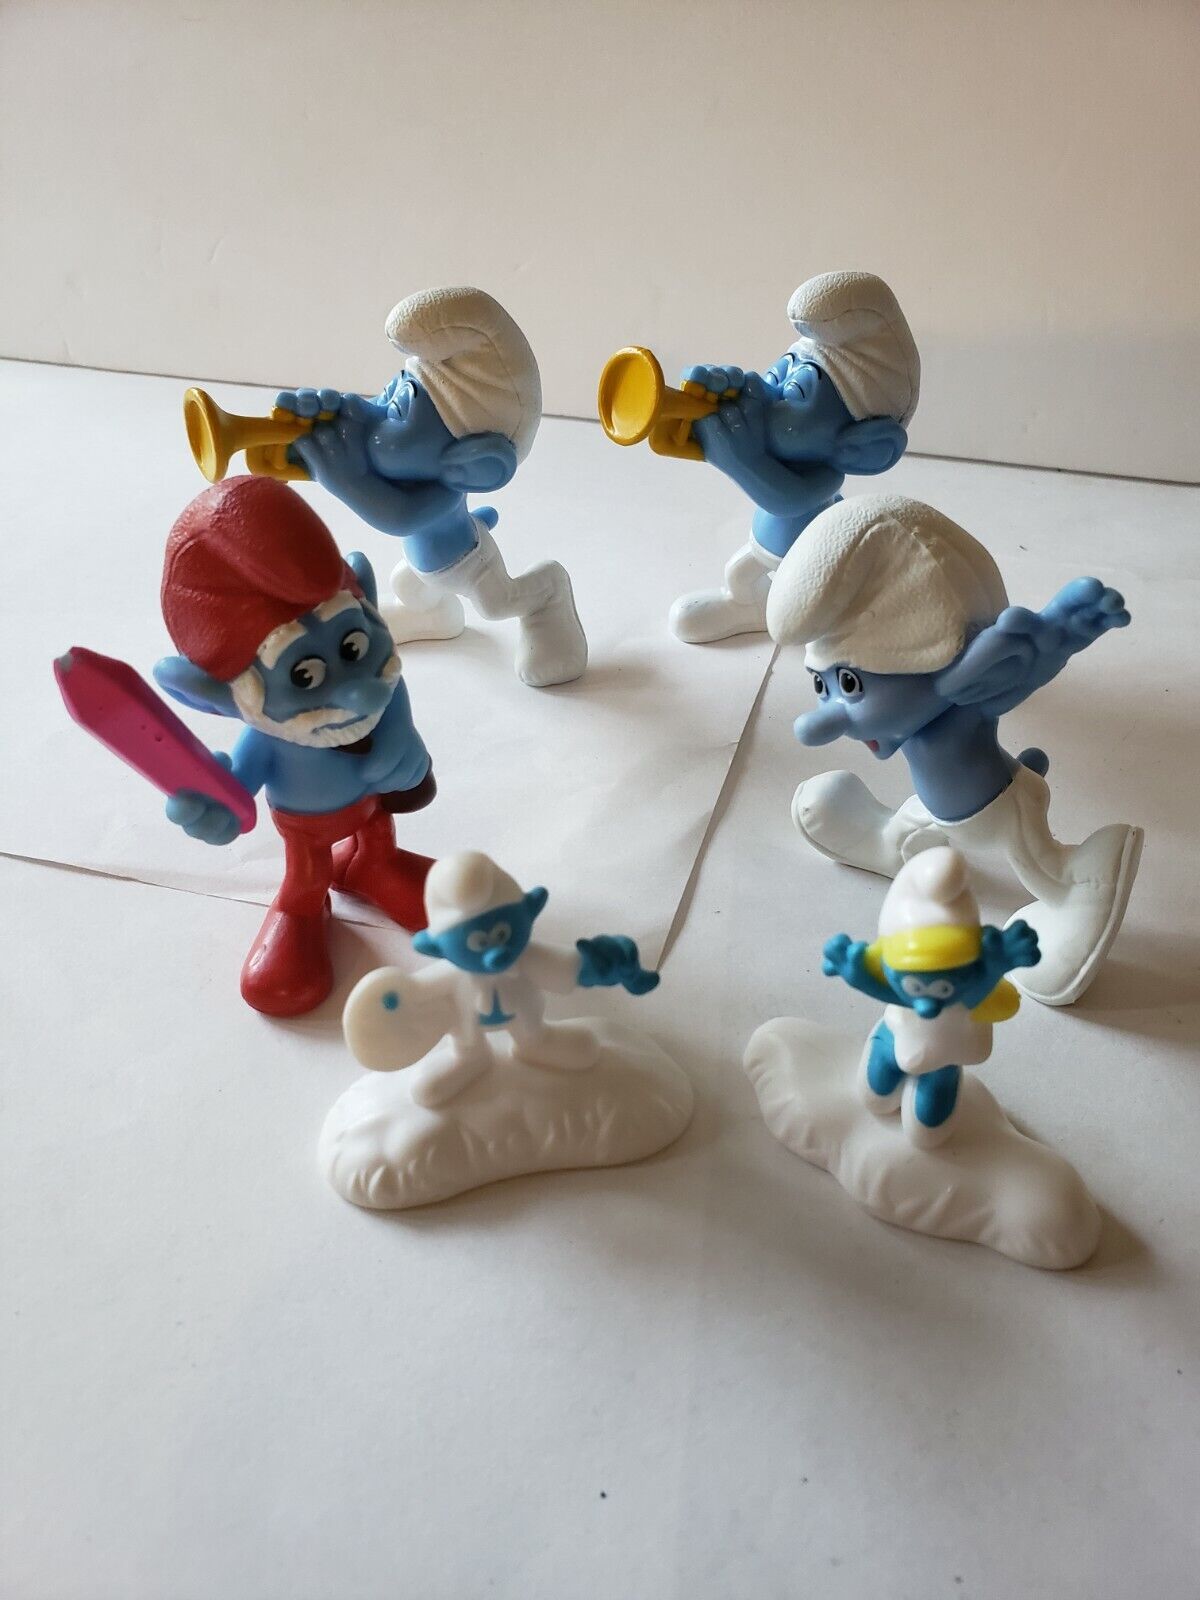 McDonalds Happy Meal Toys 2013, 2015 Mixed Lot of Smurfs Pre-owned